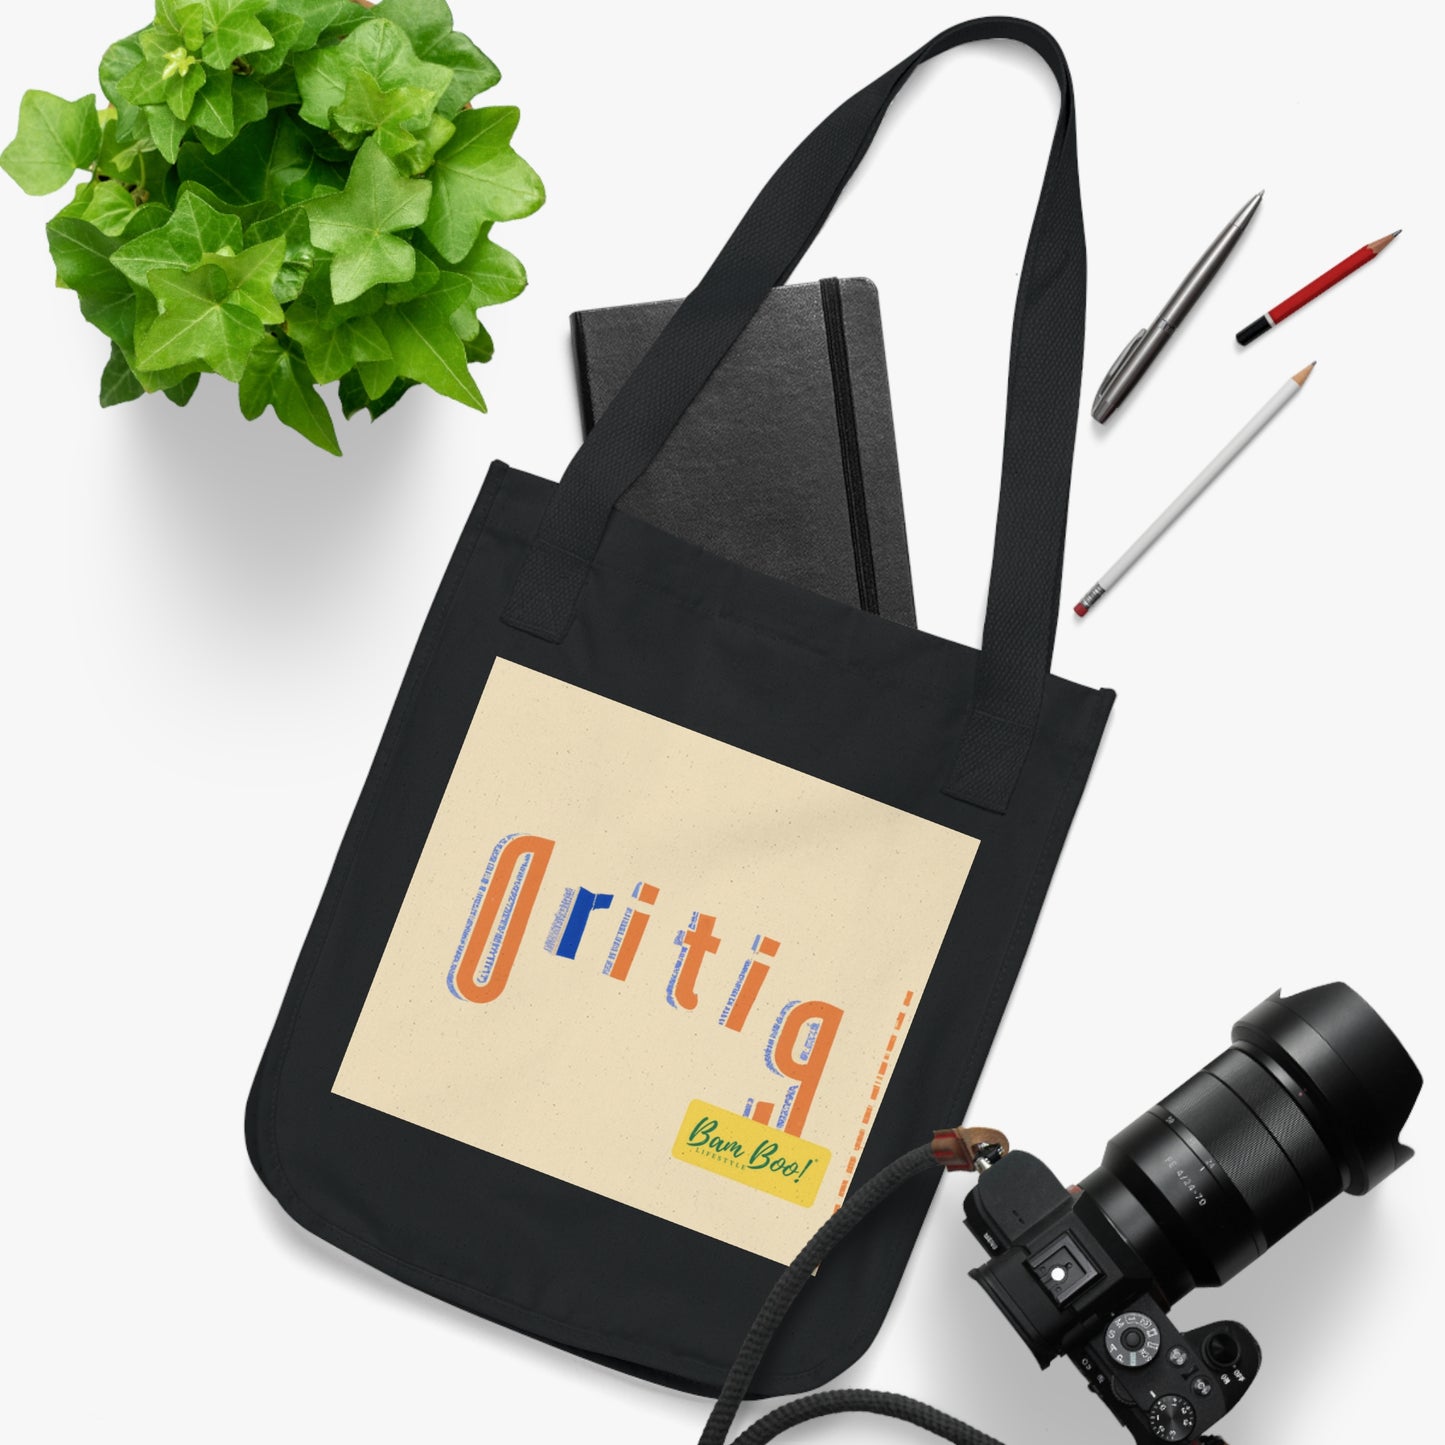 "Exploring the Visual Palette: Creating Art Through Shapes, Colors, and Textures" - Bam Boo! Lifestyle Eco-friendly Tote Bag